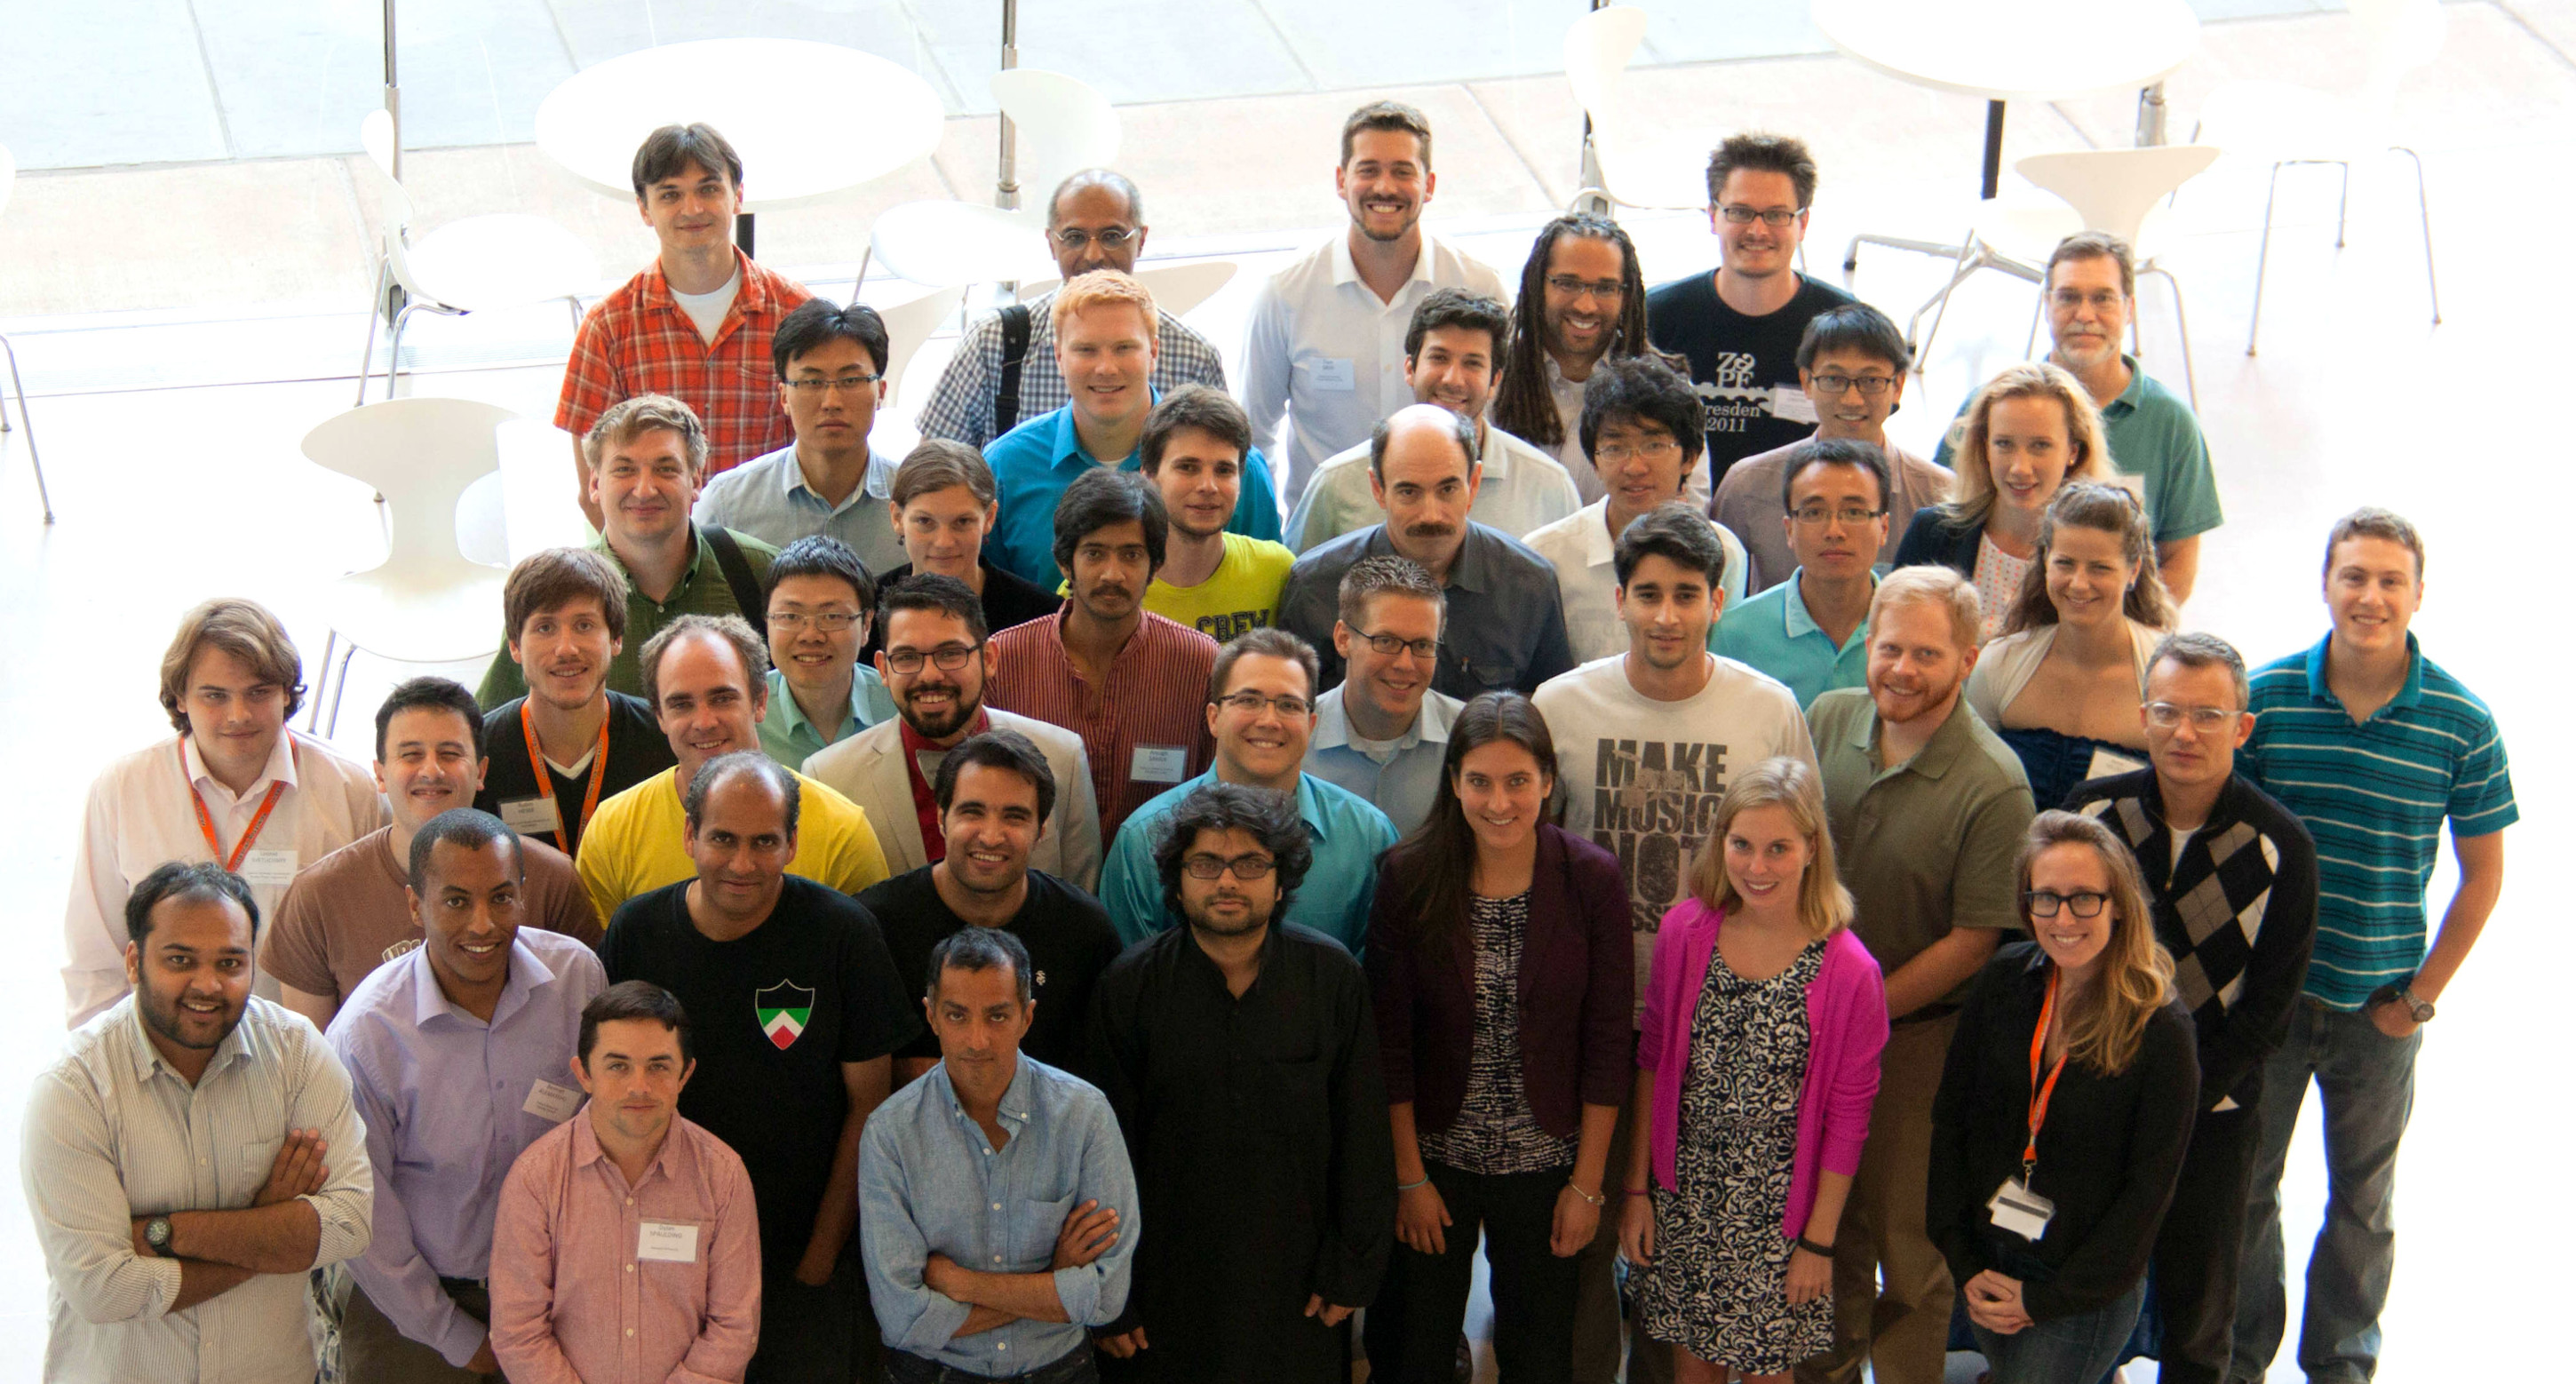 Participants from the 2014 UCS Summer Symposium on Science and World Affairs